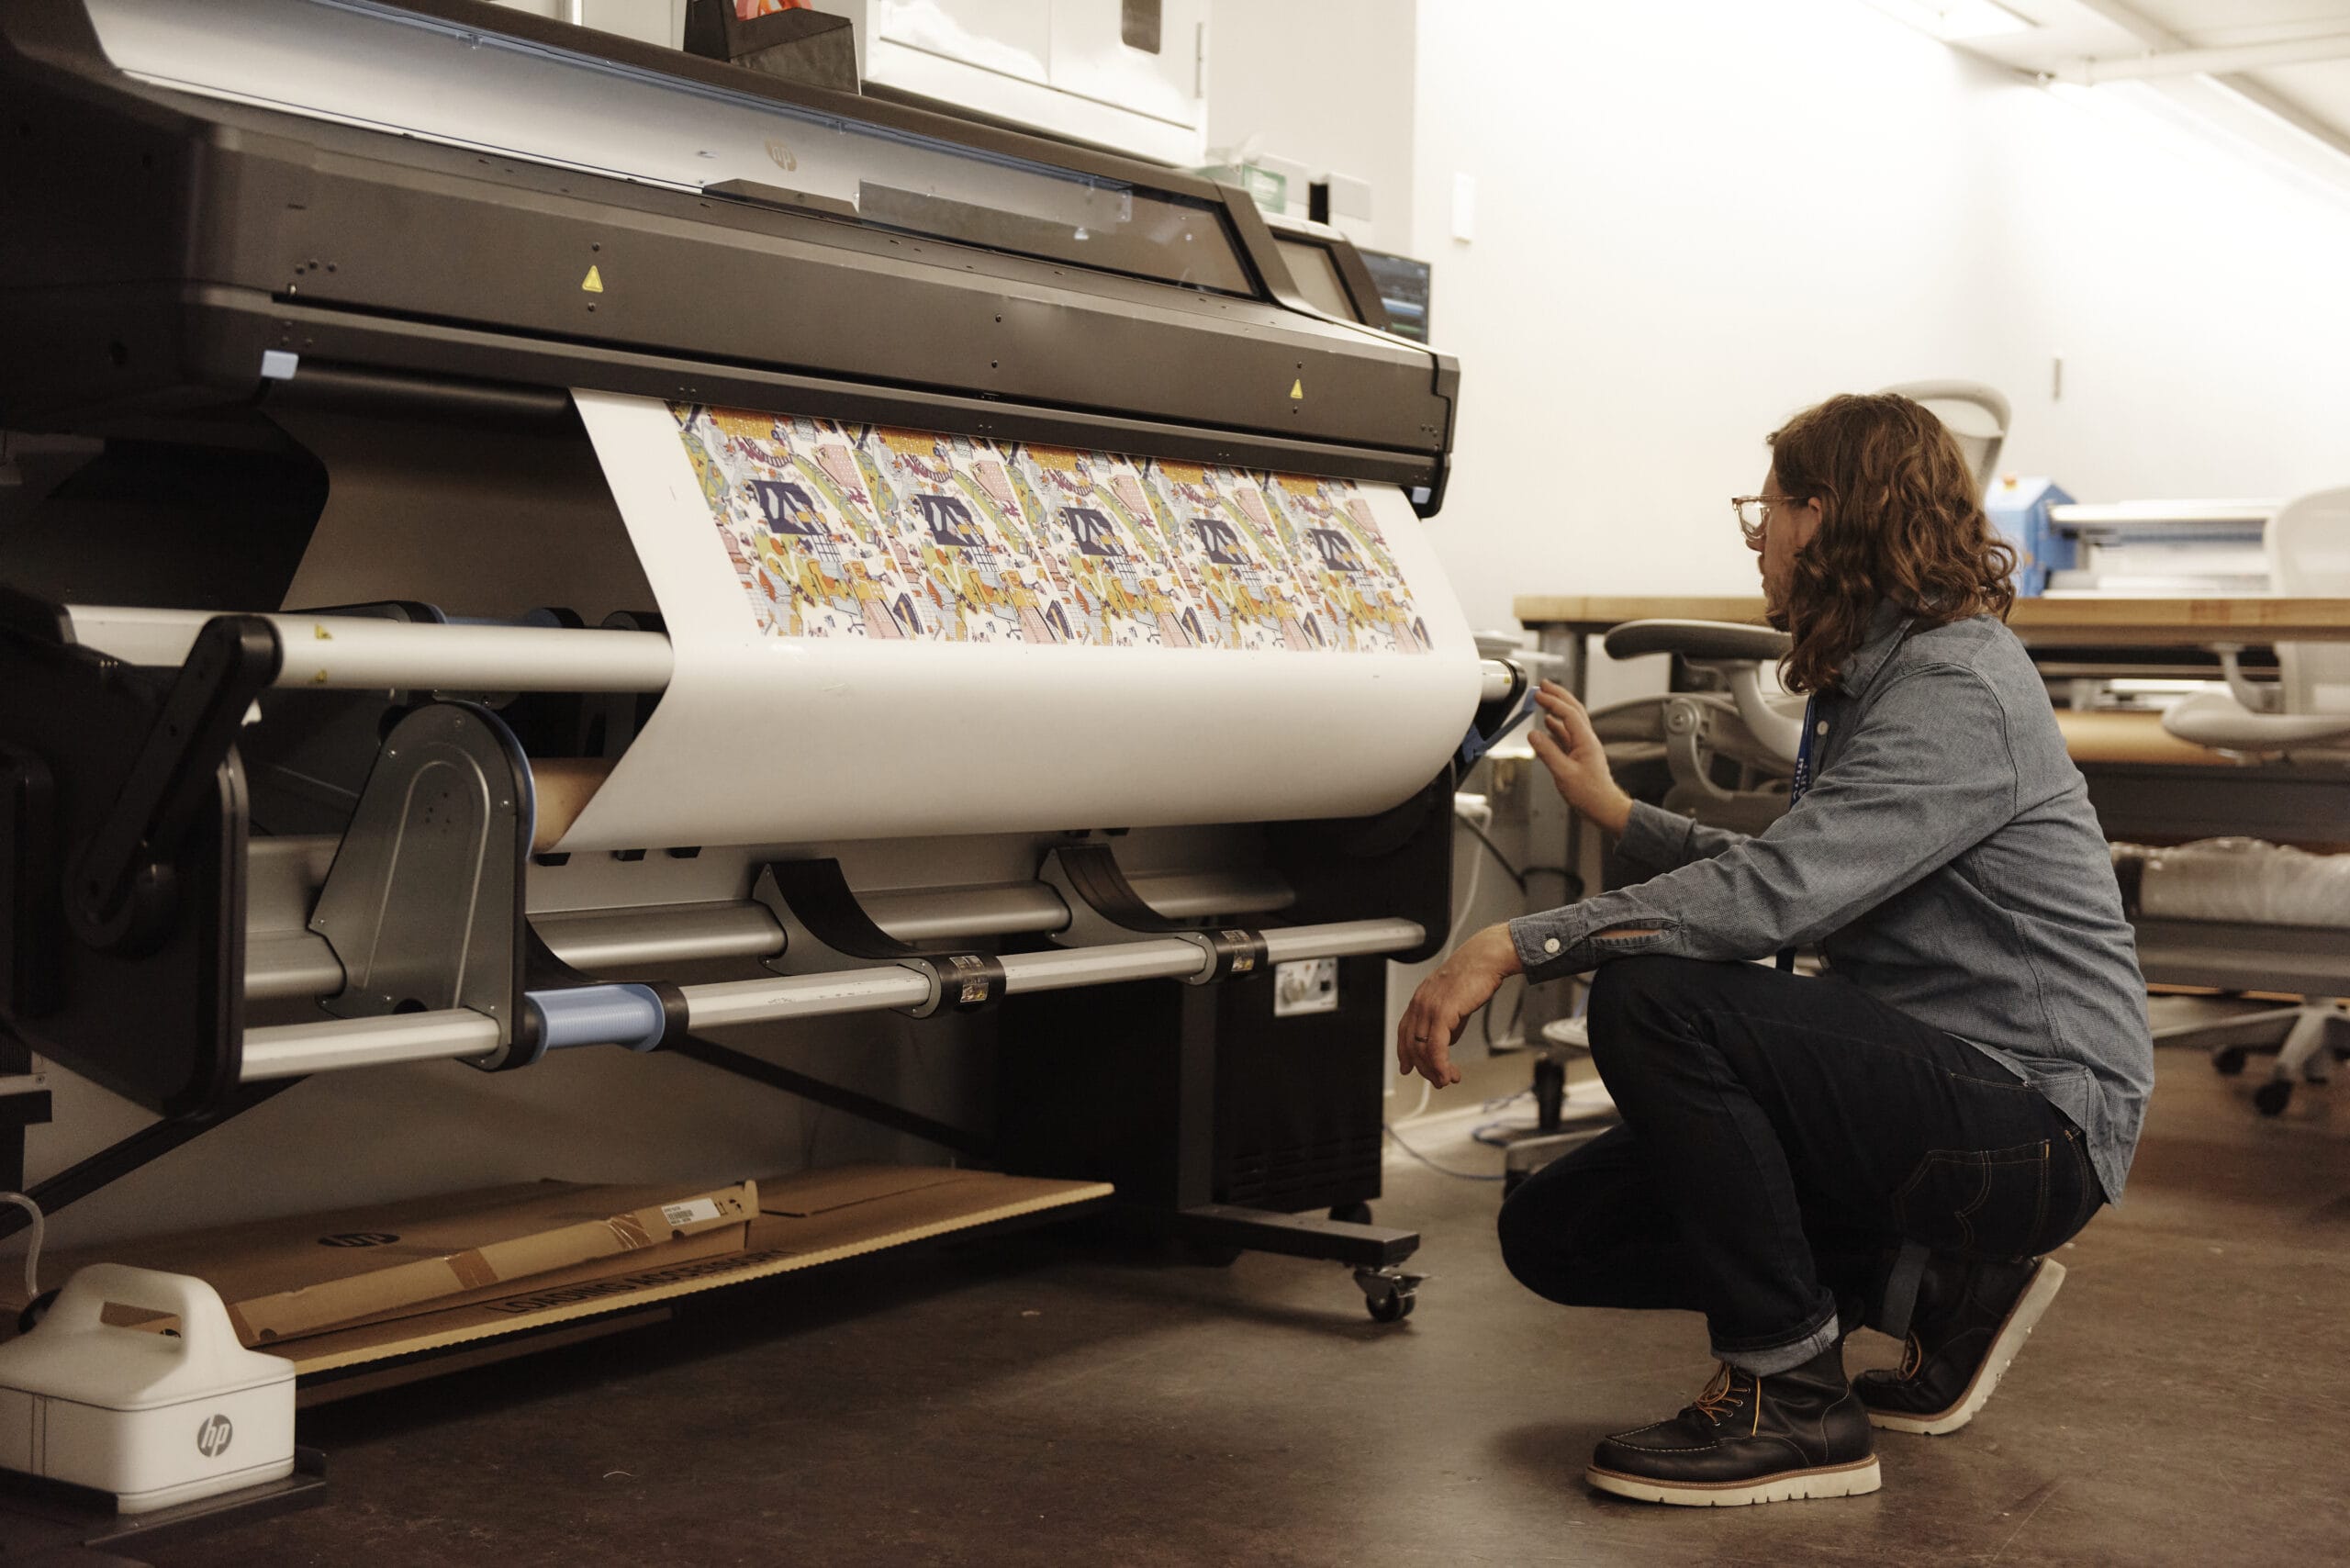 A staff person squatting in front of a wide roll printer in the lab.